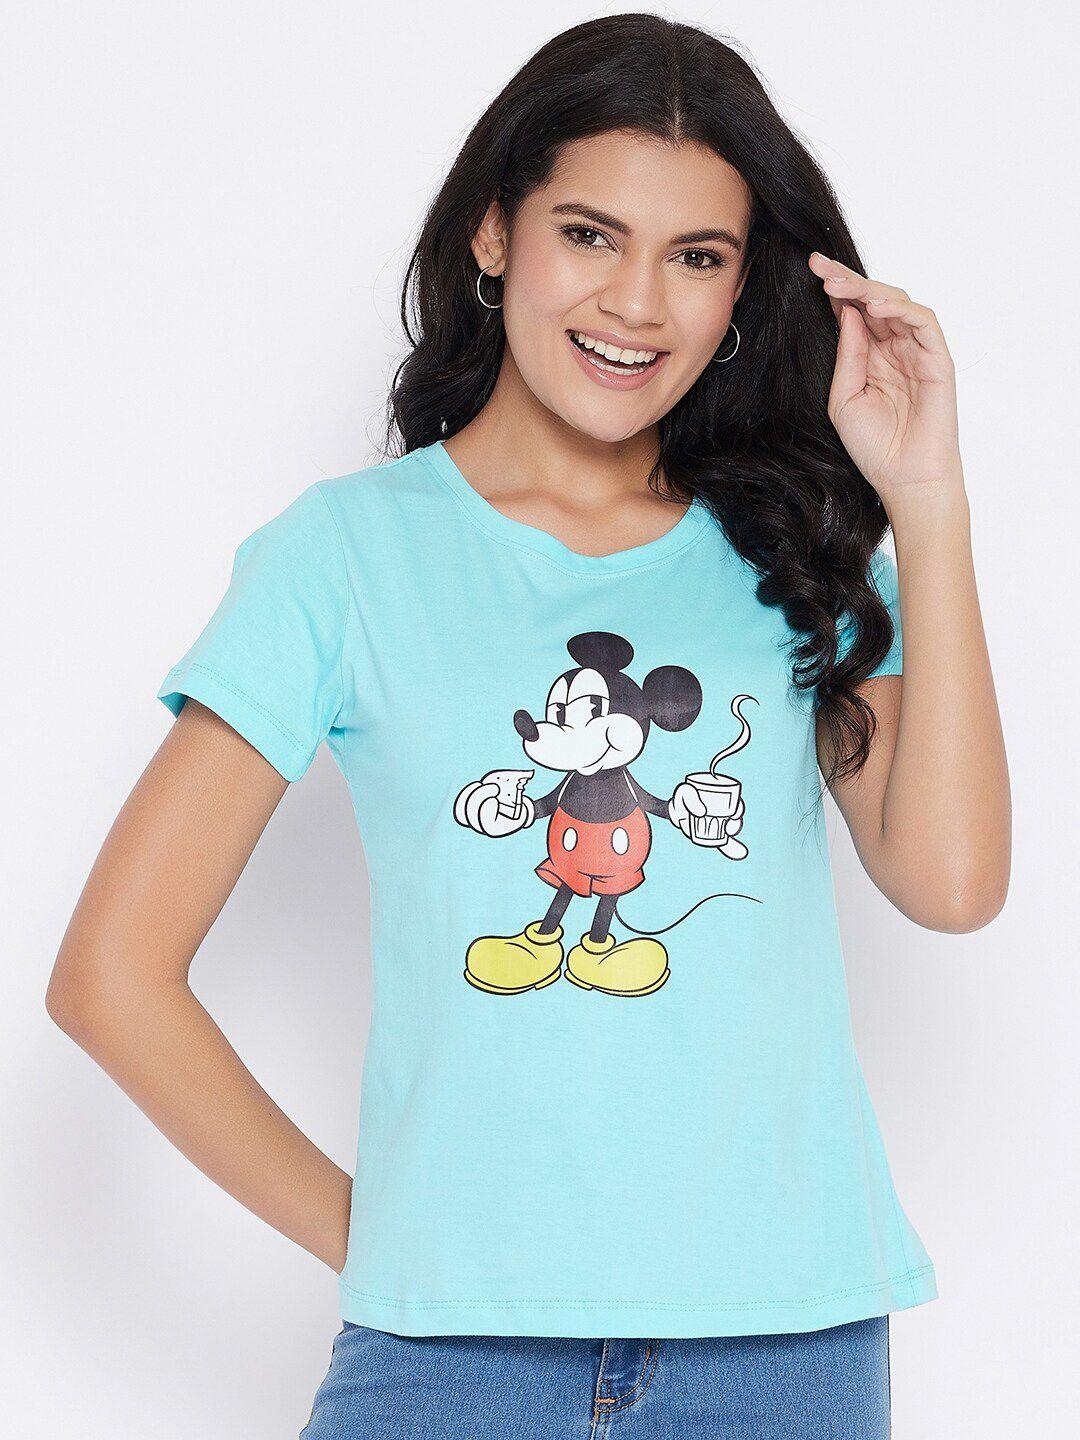 disney by wear your mind women blue printed t-shirt